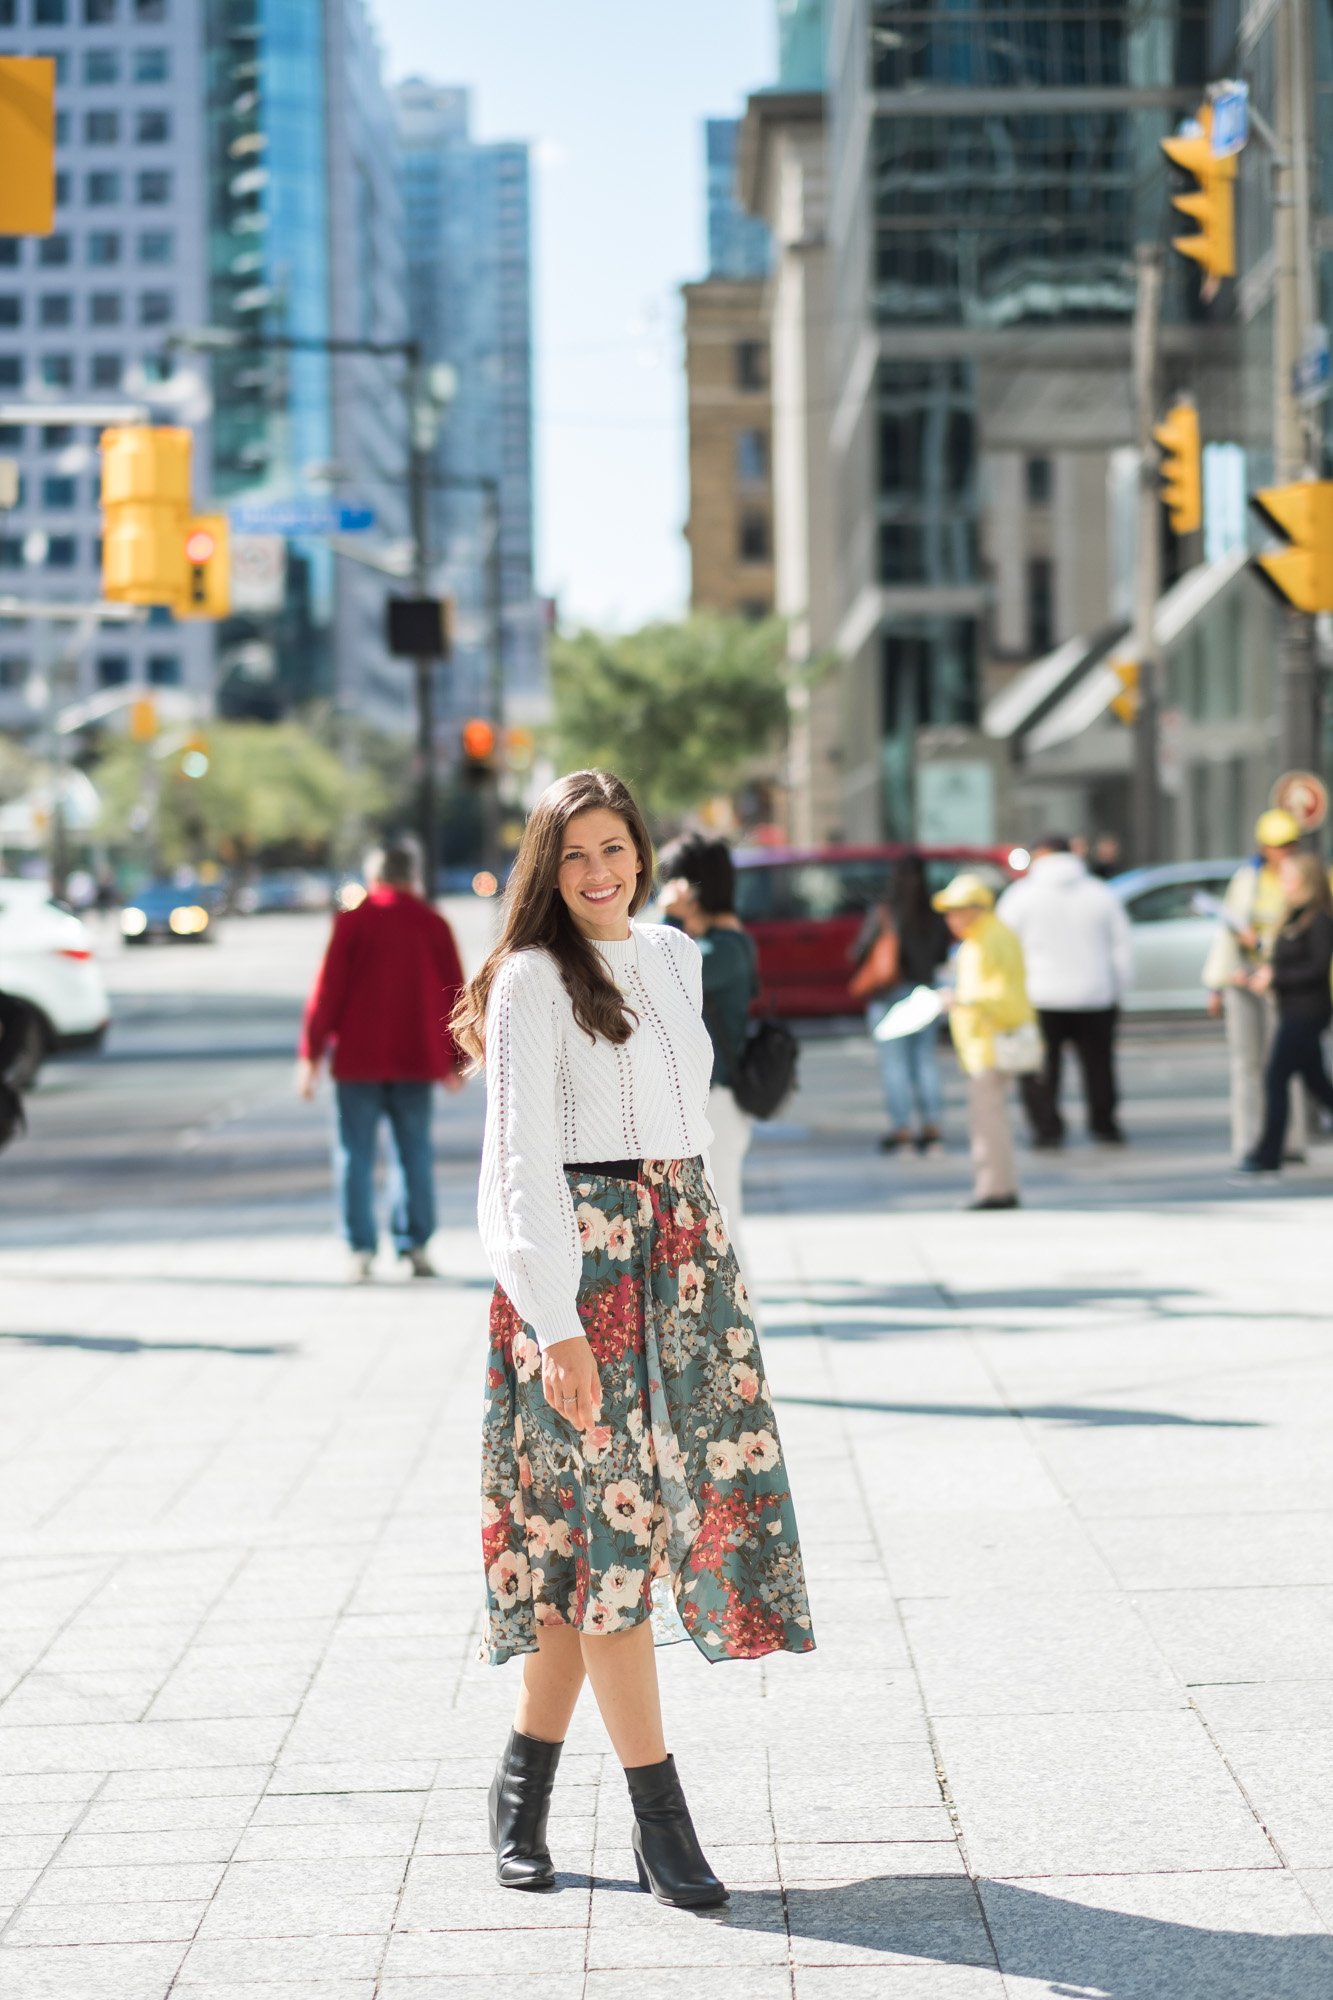 Wild Rosebuds in Downtown Toronto wearing Floral Zara Skirt and White Sweater from Forever 21